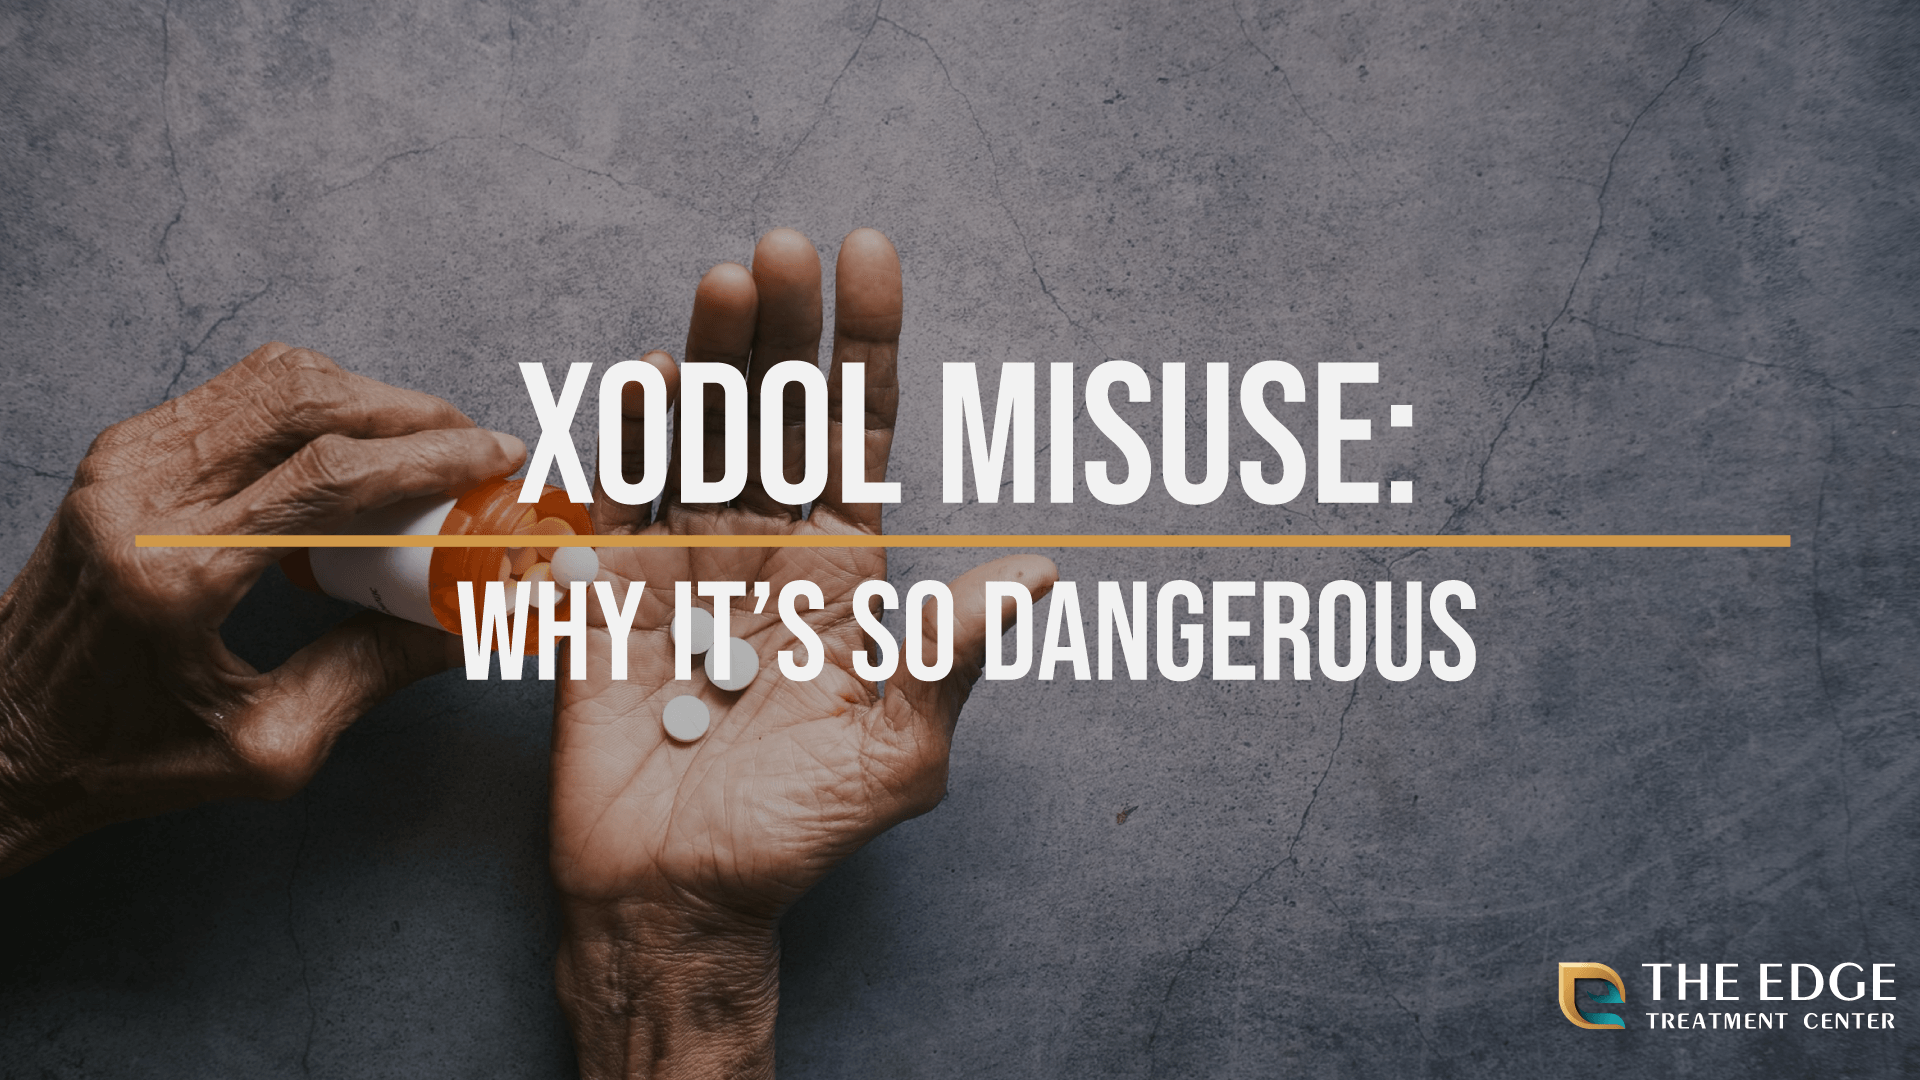 What is Xodol Misuse?